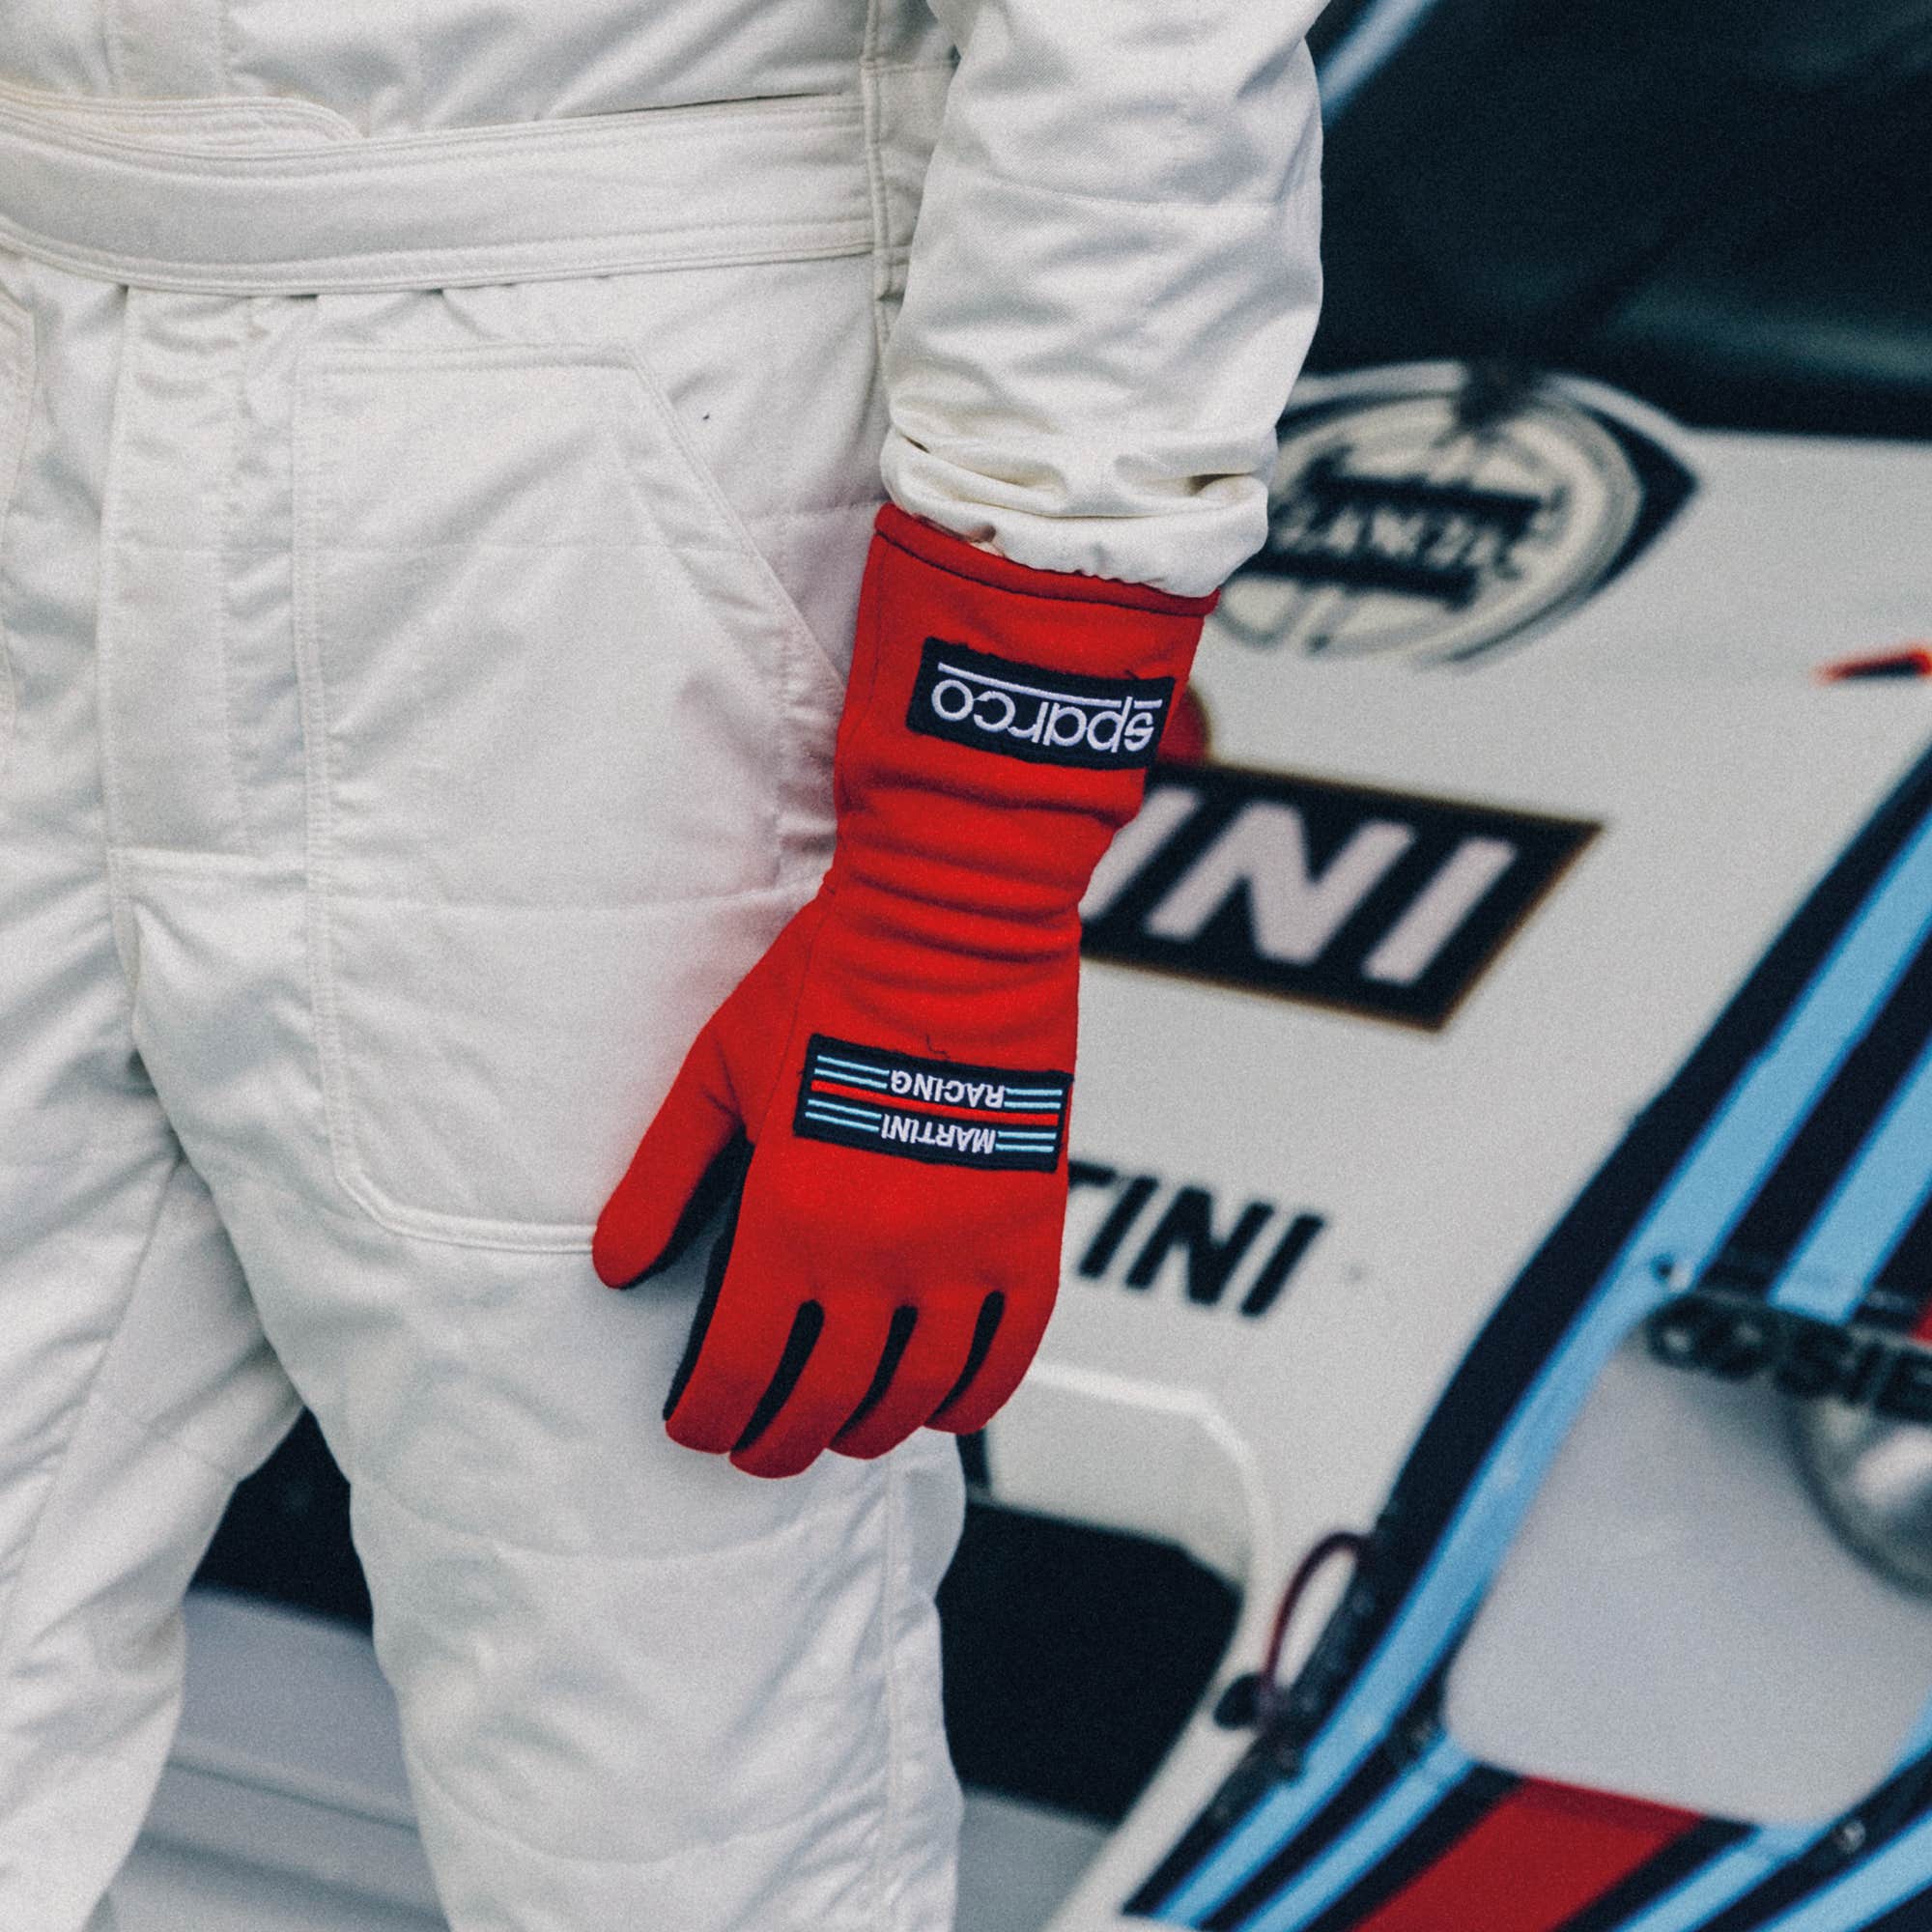 LAND CLASSIC MARTINI RACING - Sparco Shop